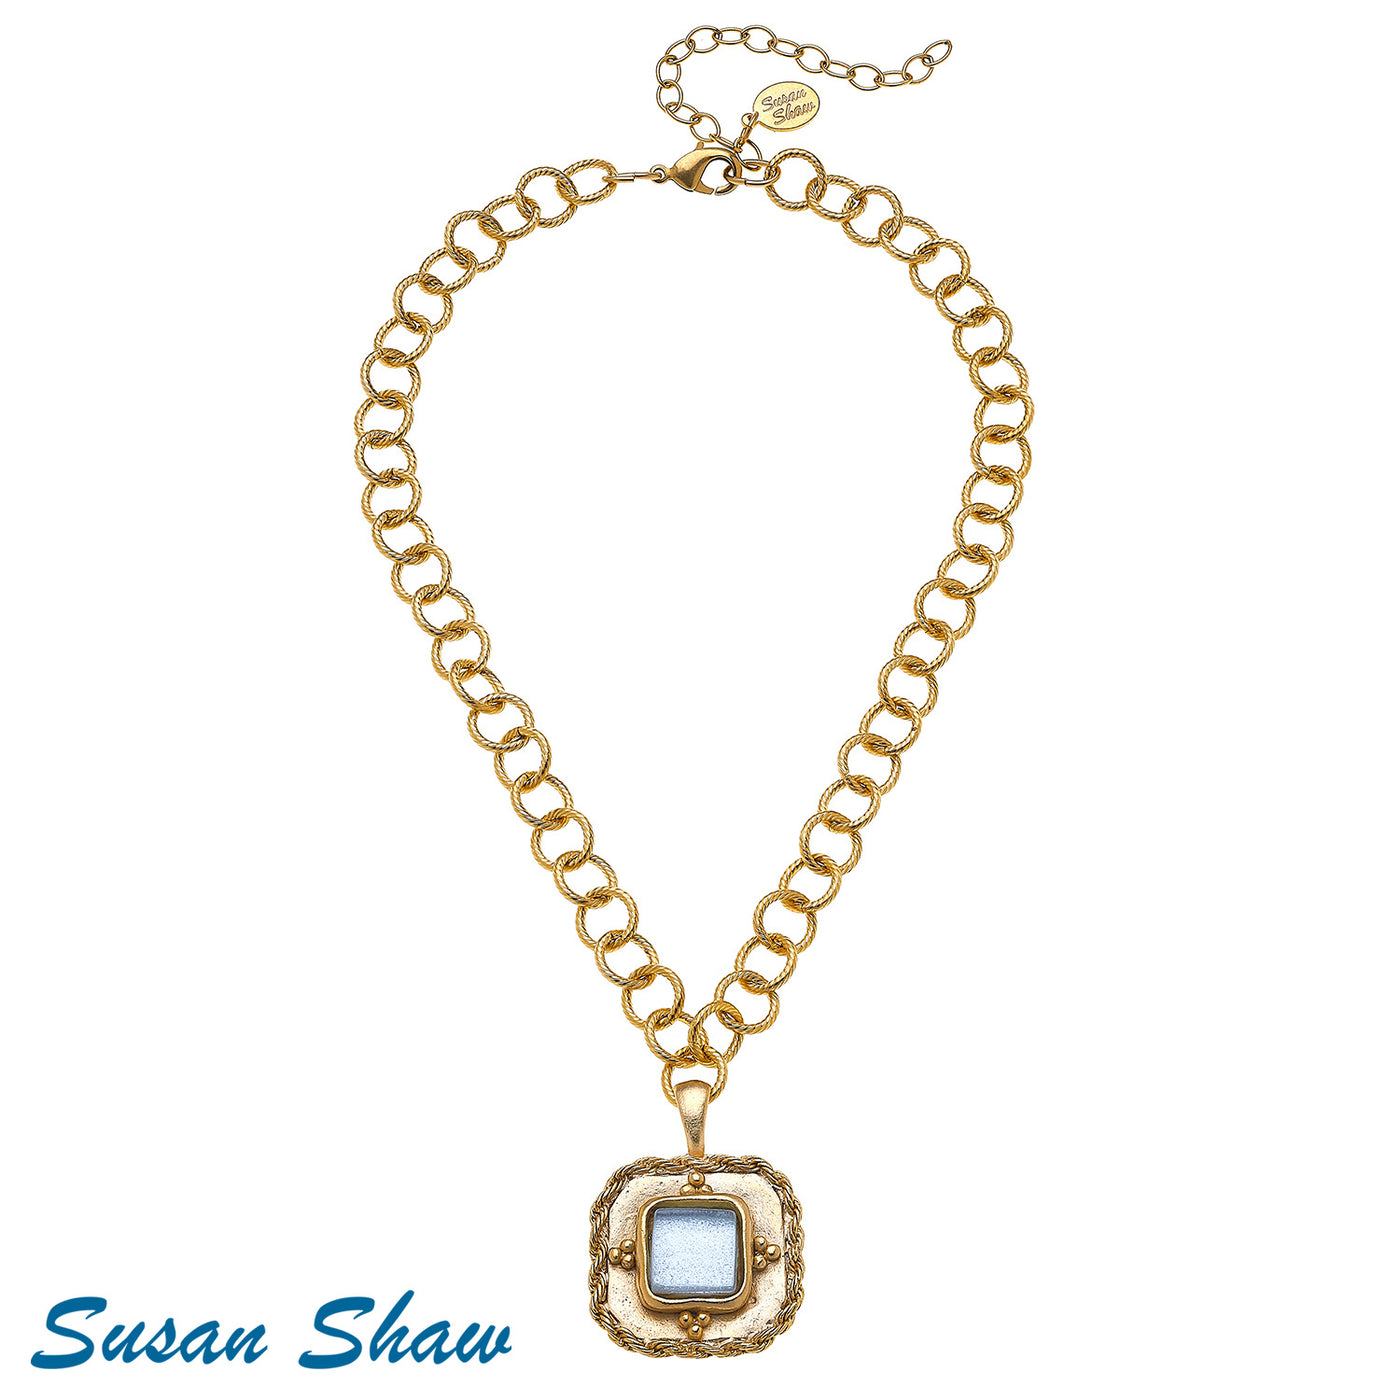 Madeline White French Glass Chain Necklace - Susan Shaw